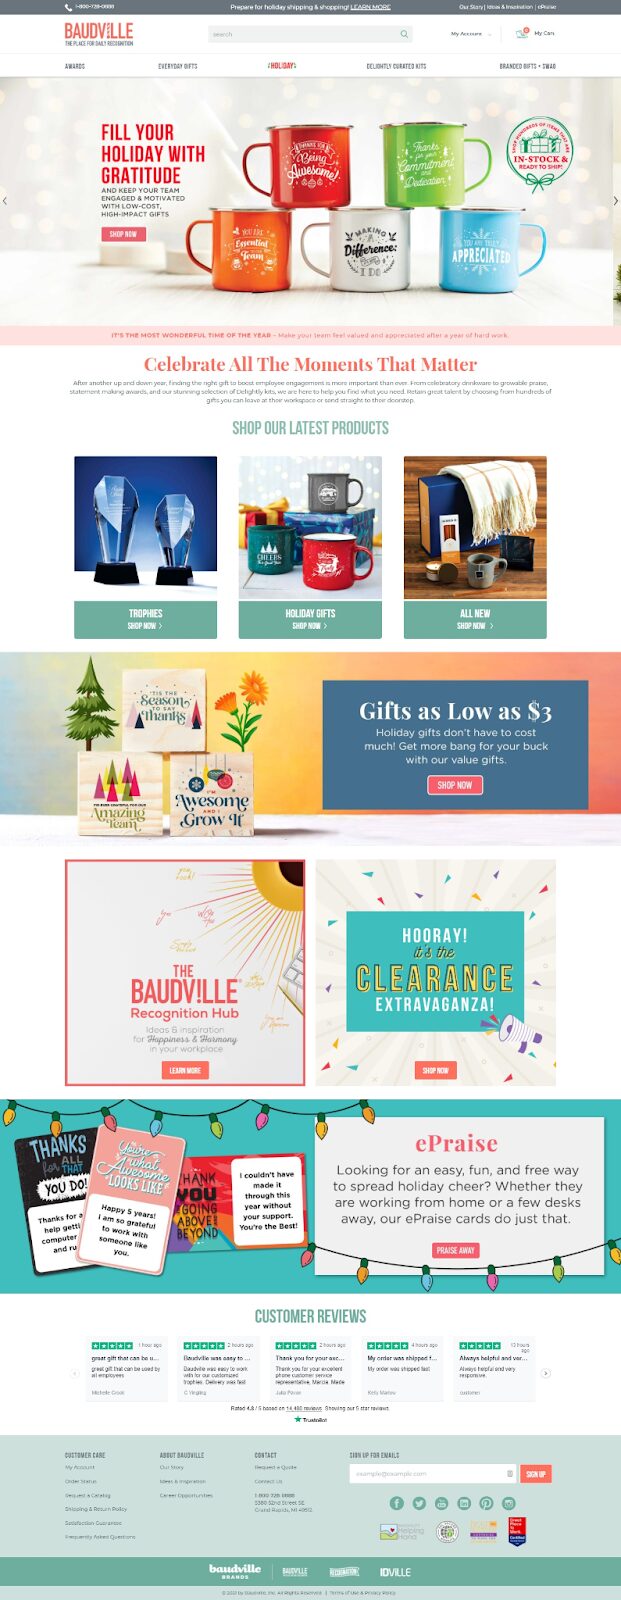 Redesign Product Landing Page - holiday marketing ideas